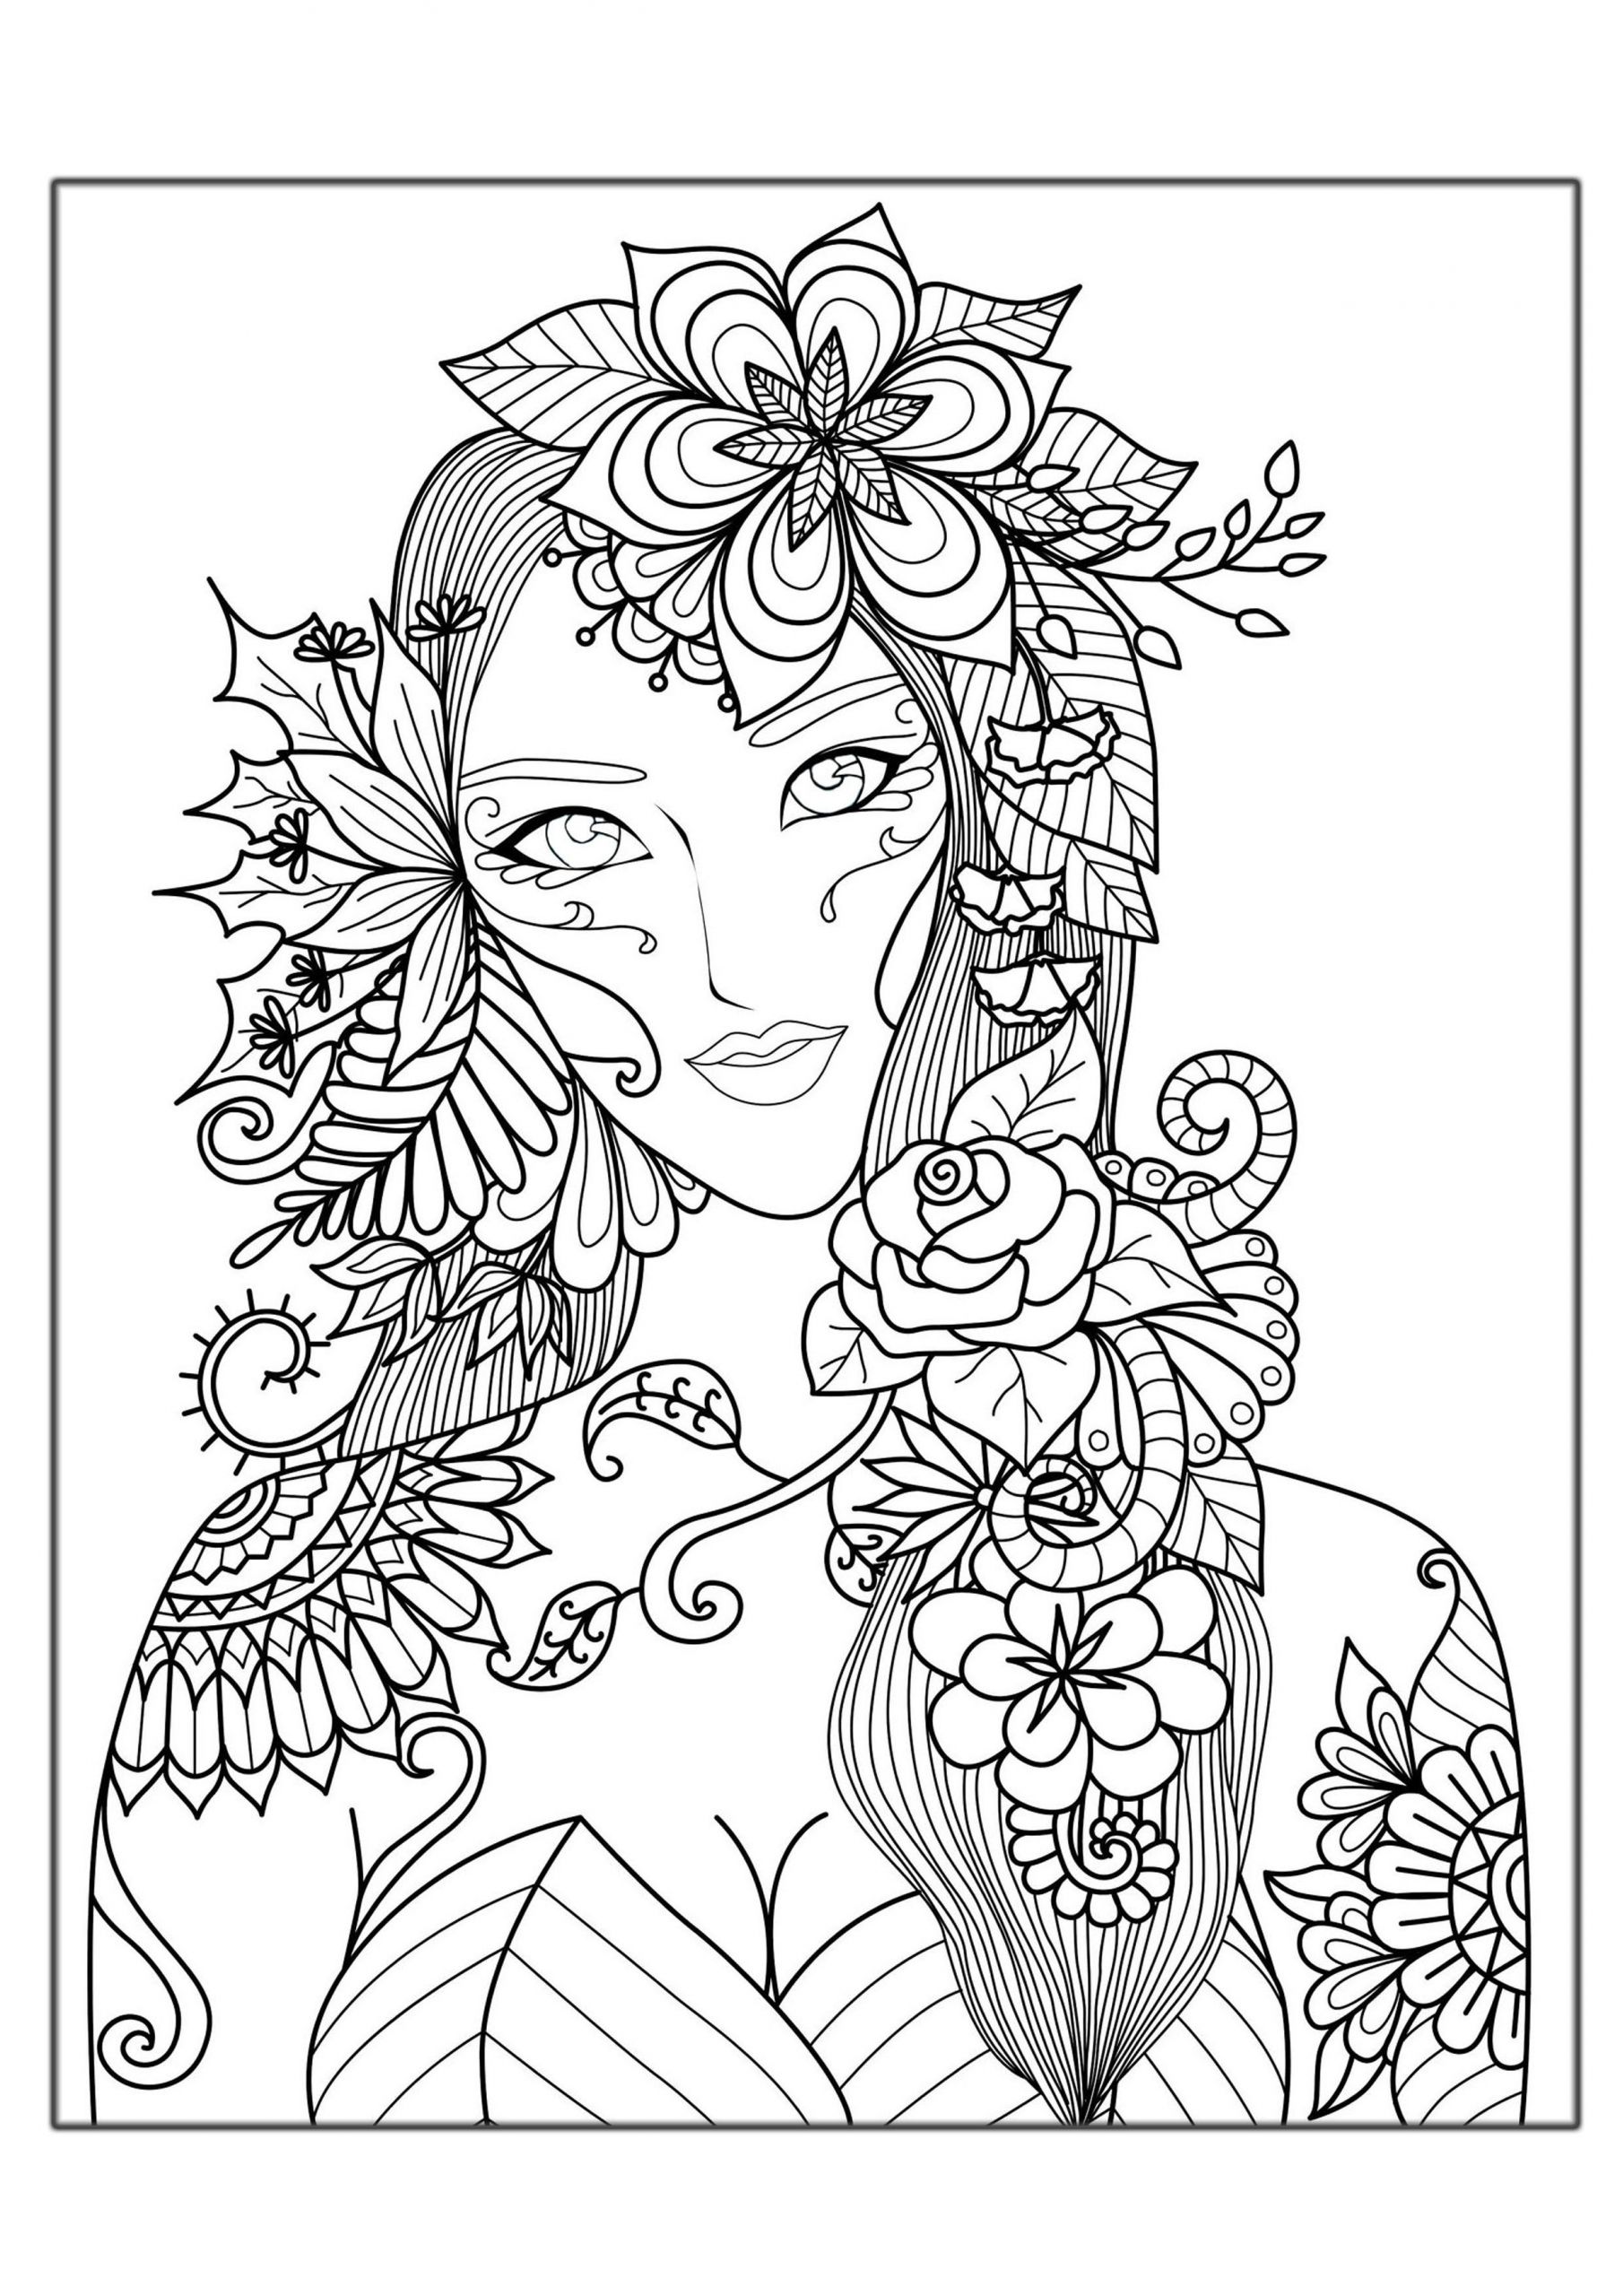 Coloring Pages For Adult Girls
 Woman flowers Anti stress Adult Coloring Pages